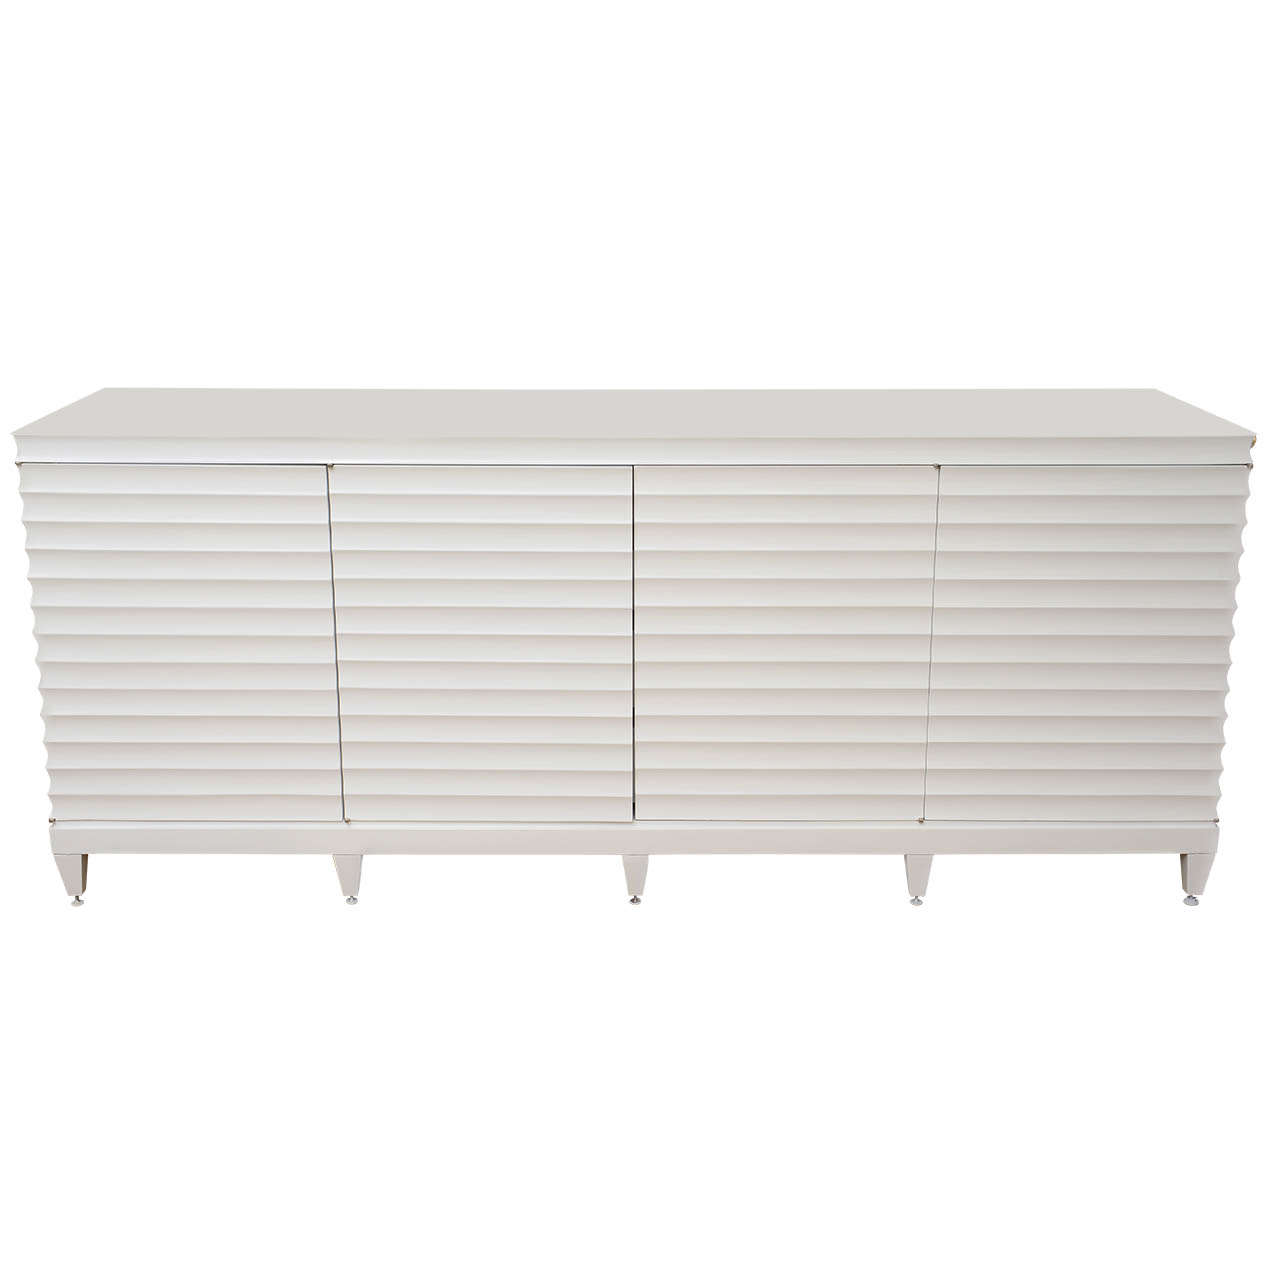 White Lacquered Fluted Cabinet//Buffet/Dresser SATURDAY SALE